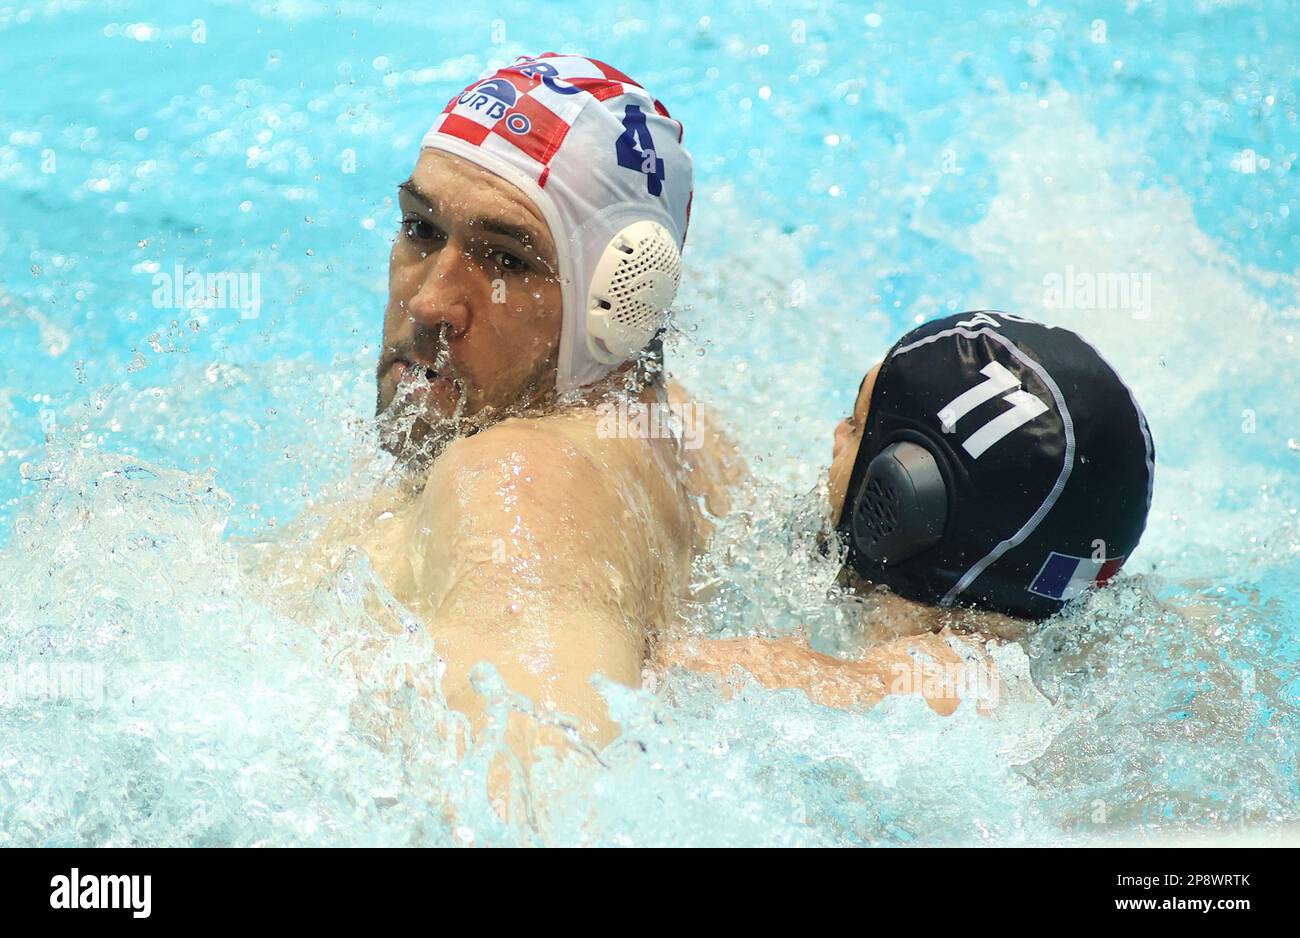 ZAGREB, CROATIA - [DATE]: Pierre-Frederic Vanperstraete of France and Ivan Krapic of Croatia fightning for the ball during the Men's Water Polo World Cup match between France and Croatia on March 9, 2023 in Zagreb, Croatia. Photo: Marko Prpic/PIXSELL Stock Photo